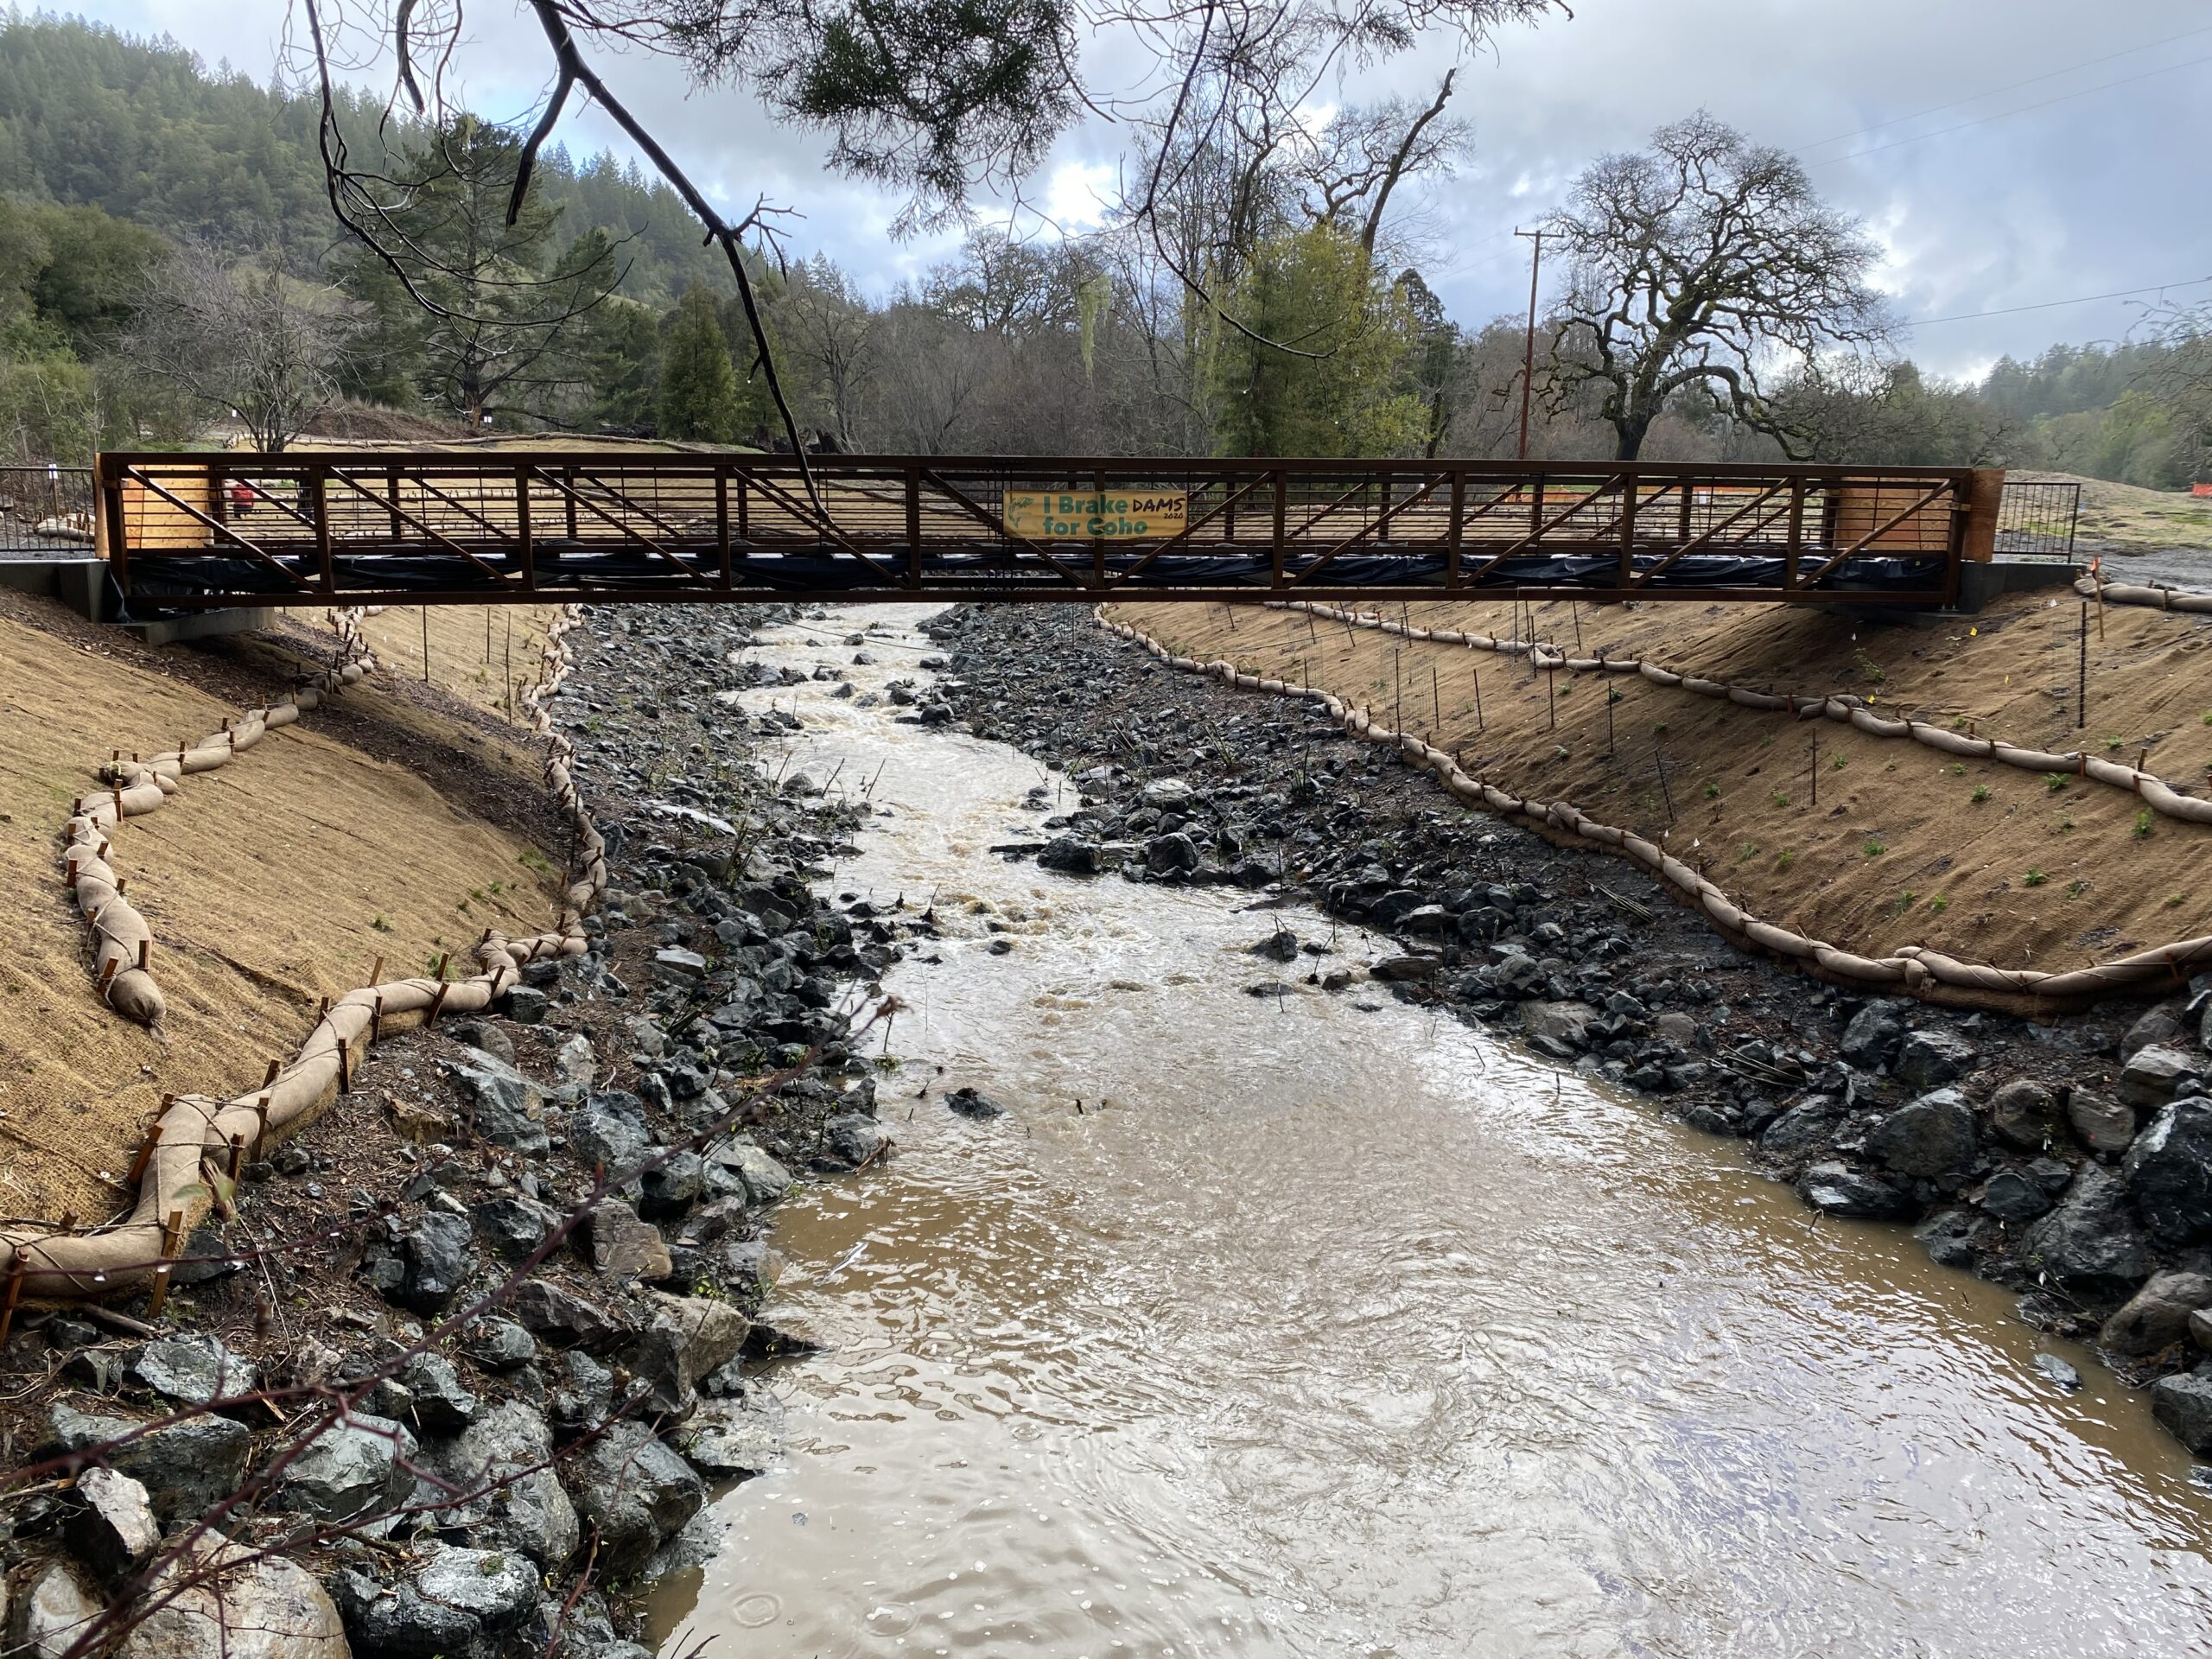 New Pedestrian Bridge Connects Community to Trails on Former Golf Course